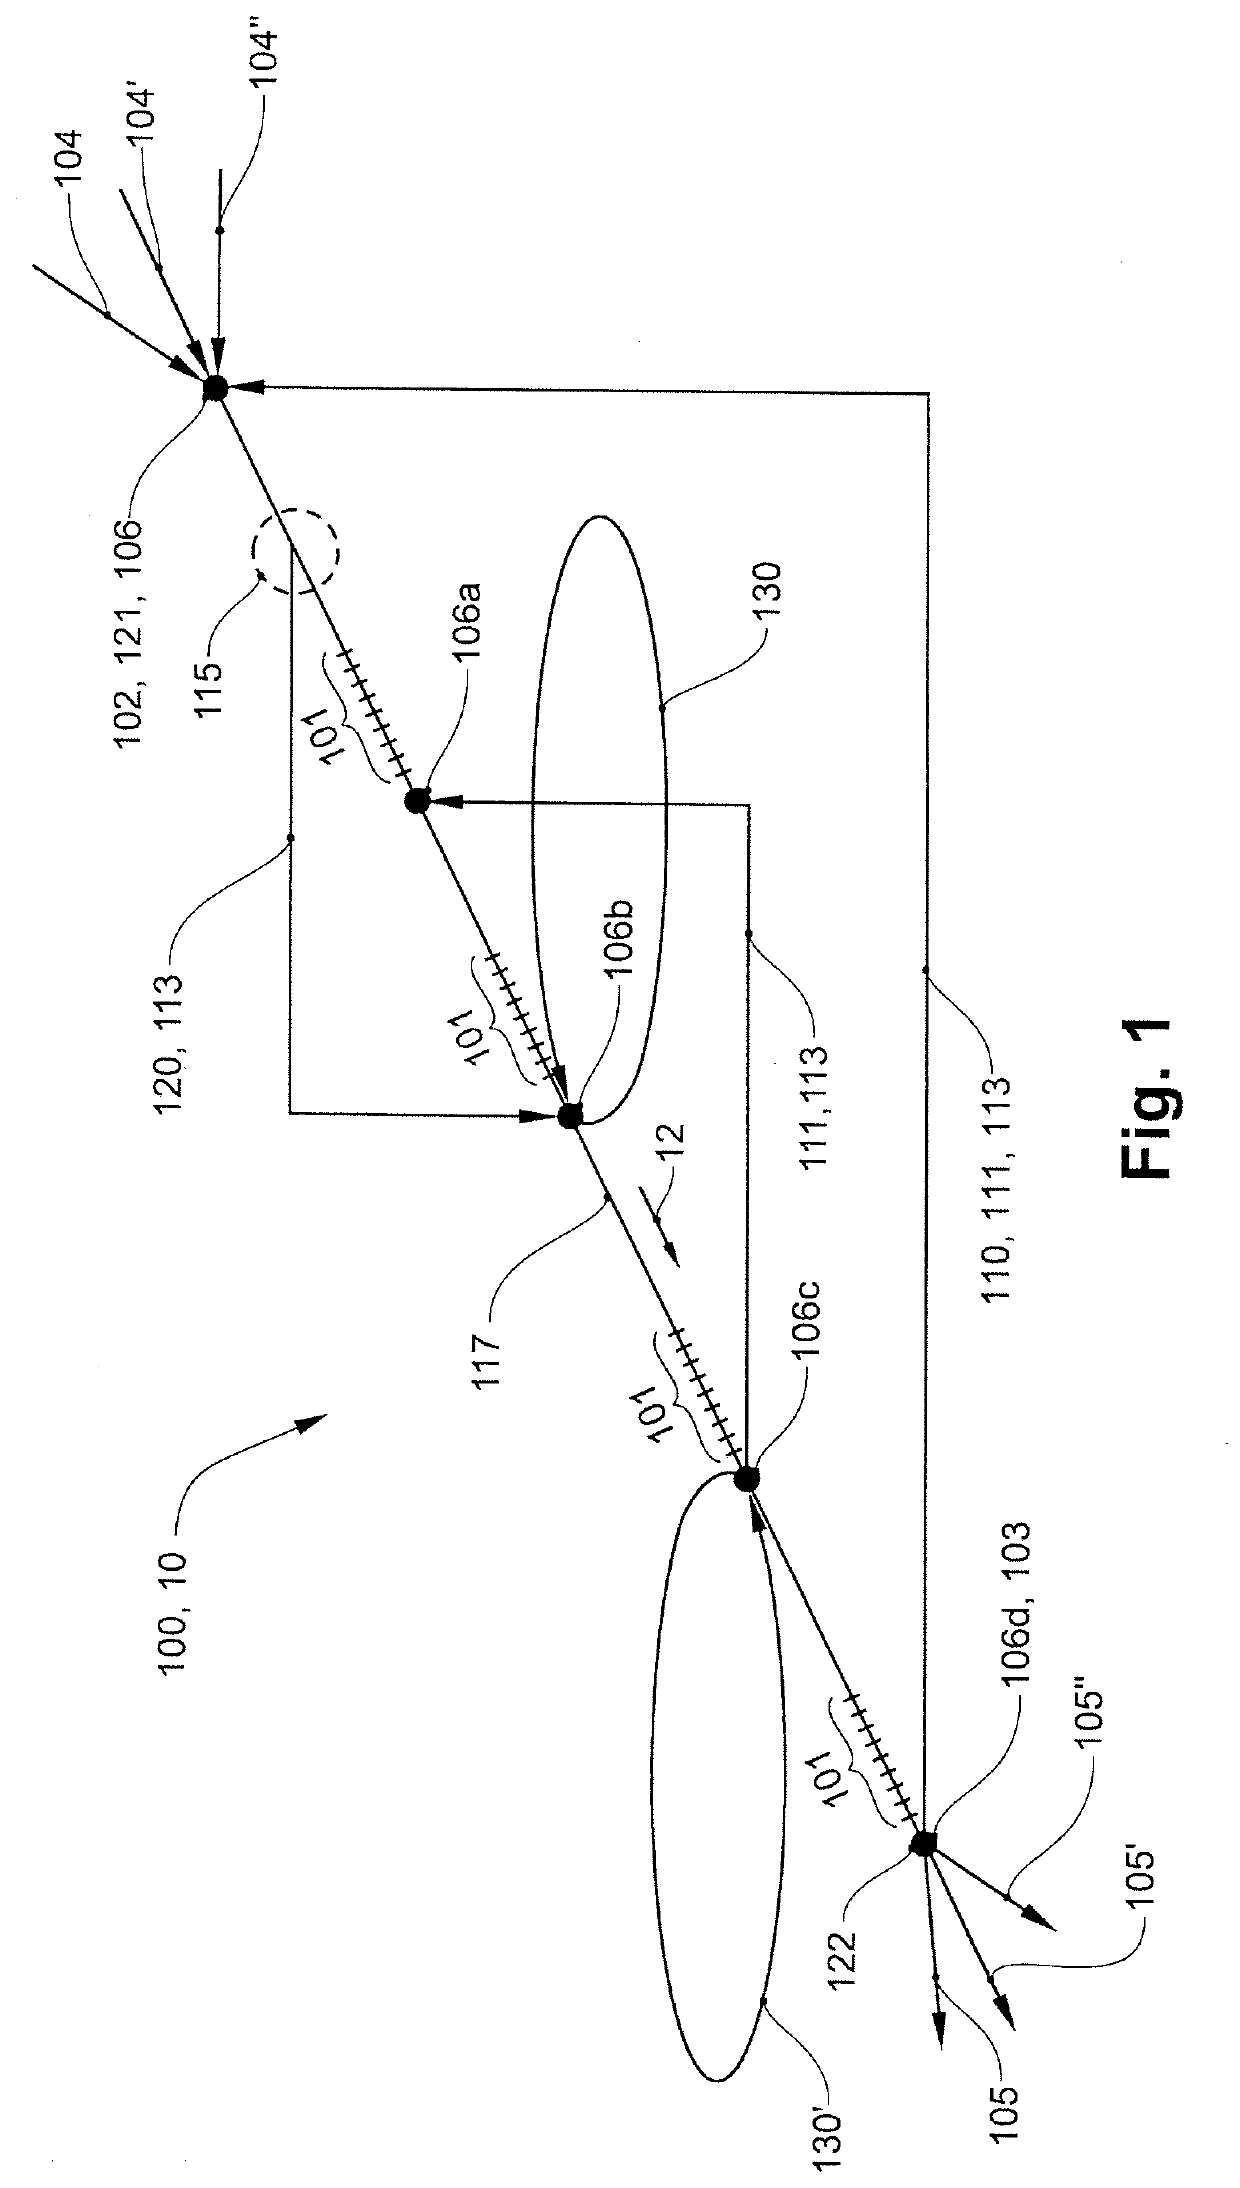 Buffer storage system for overhead conveyor systems